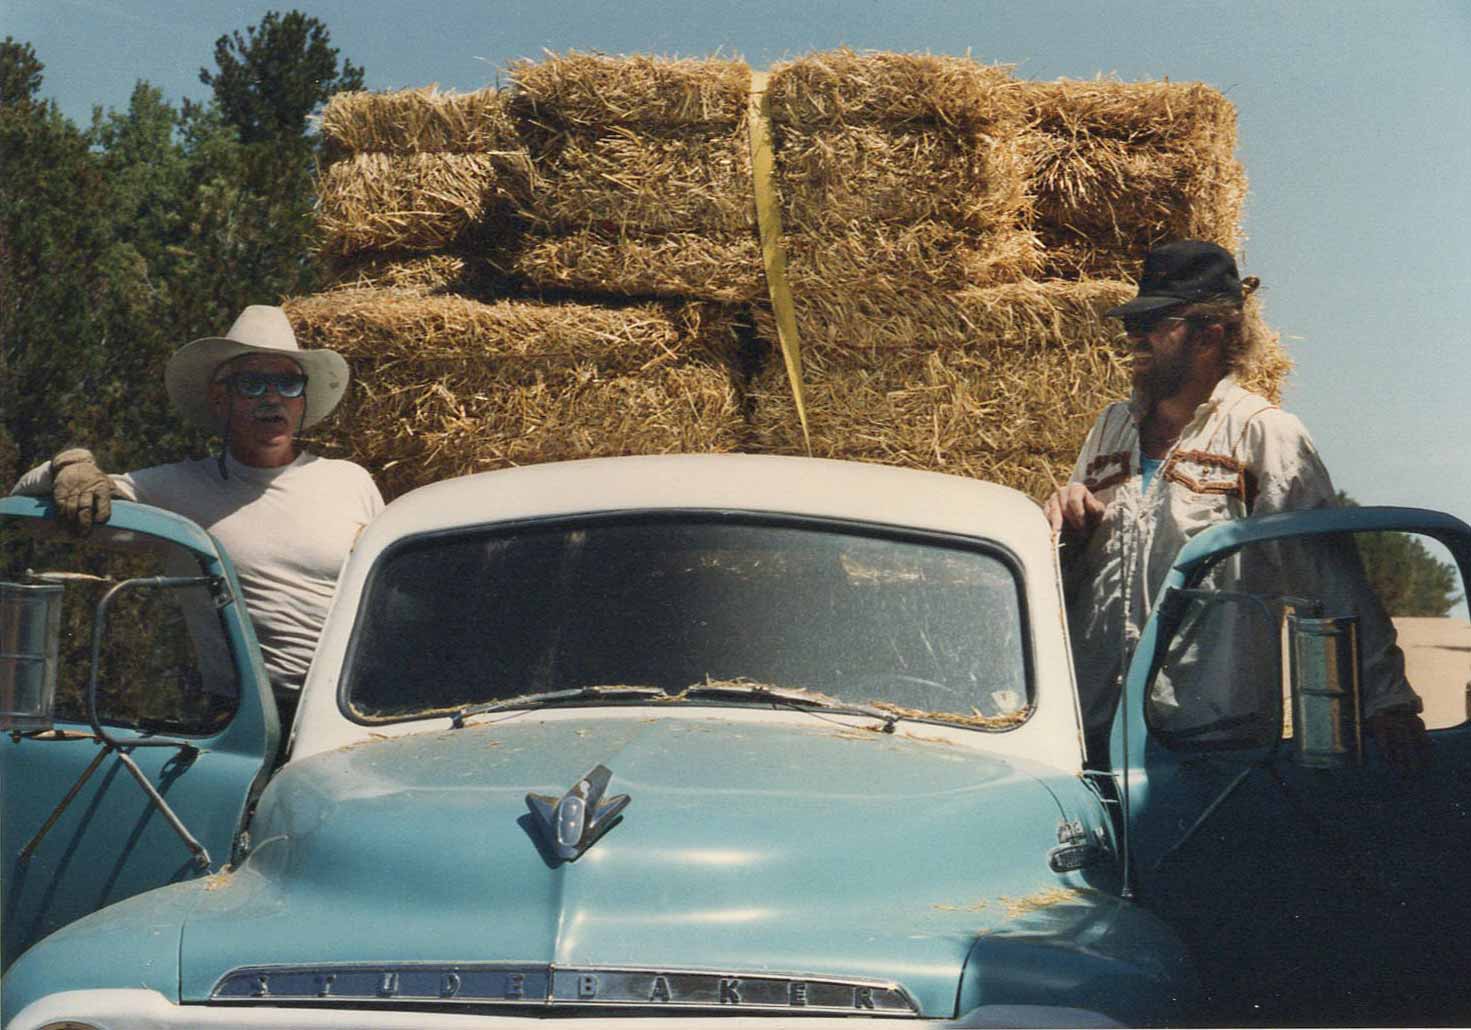 Two men deliver straw bales in an old Studebaker truck to the house Molly Spain helped build in New Mexico for her mom